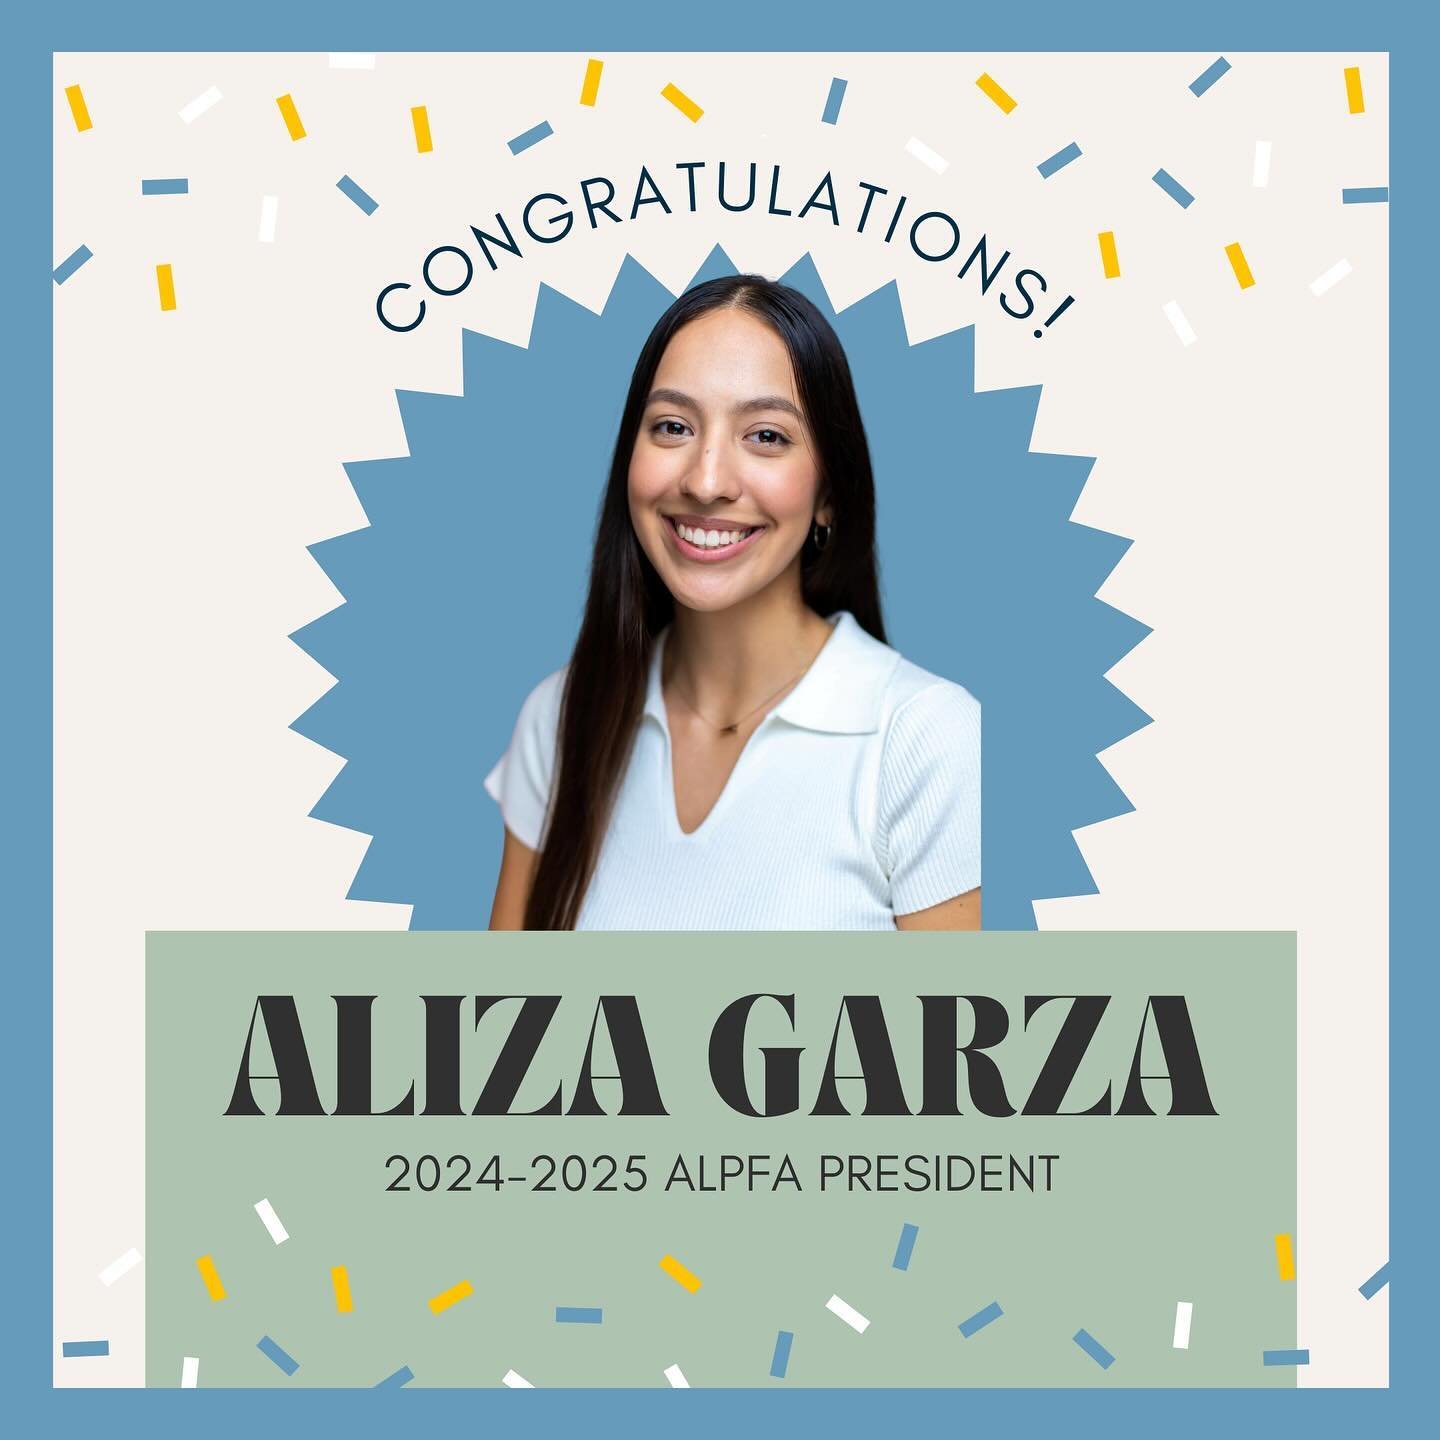 We are delighted to announce and introduce our new President of ALPFA at Texas A&amp;M: Aliza!!! 💫

Reminder that our Officer applications are open until April 17th! Apply to become a part of this amazing future team 🥳